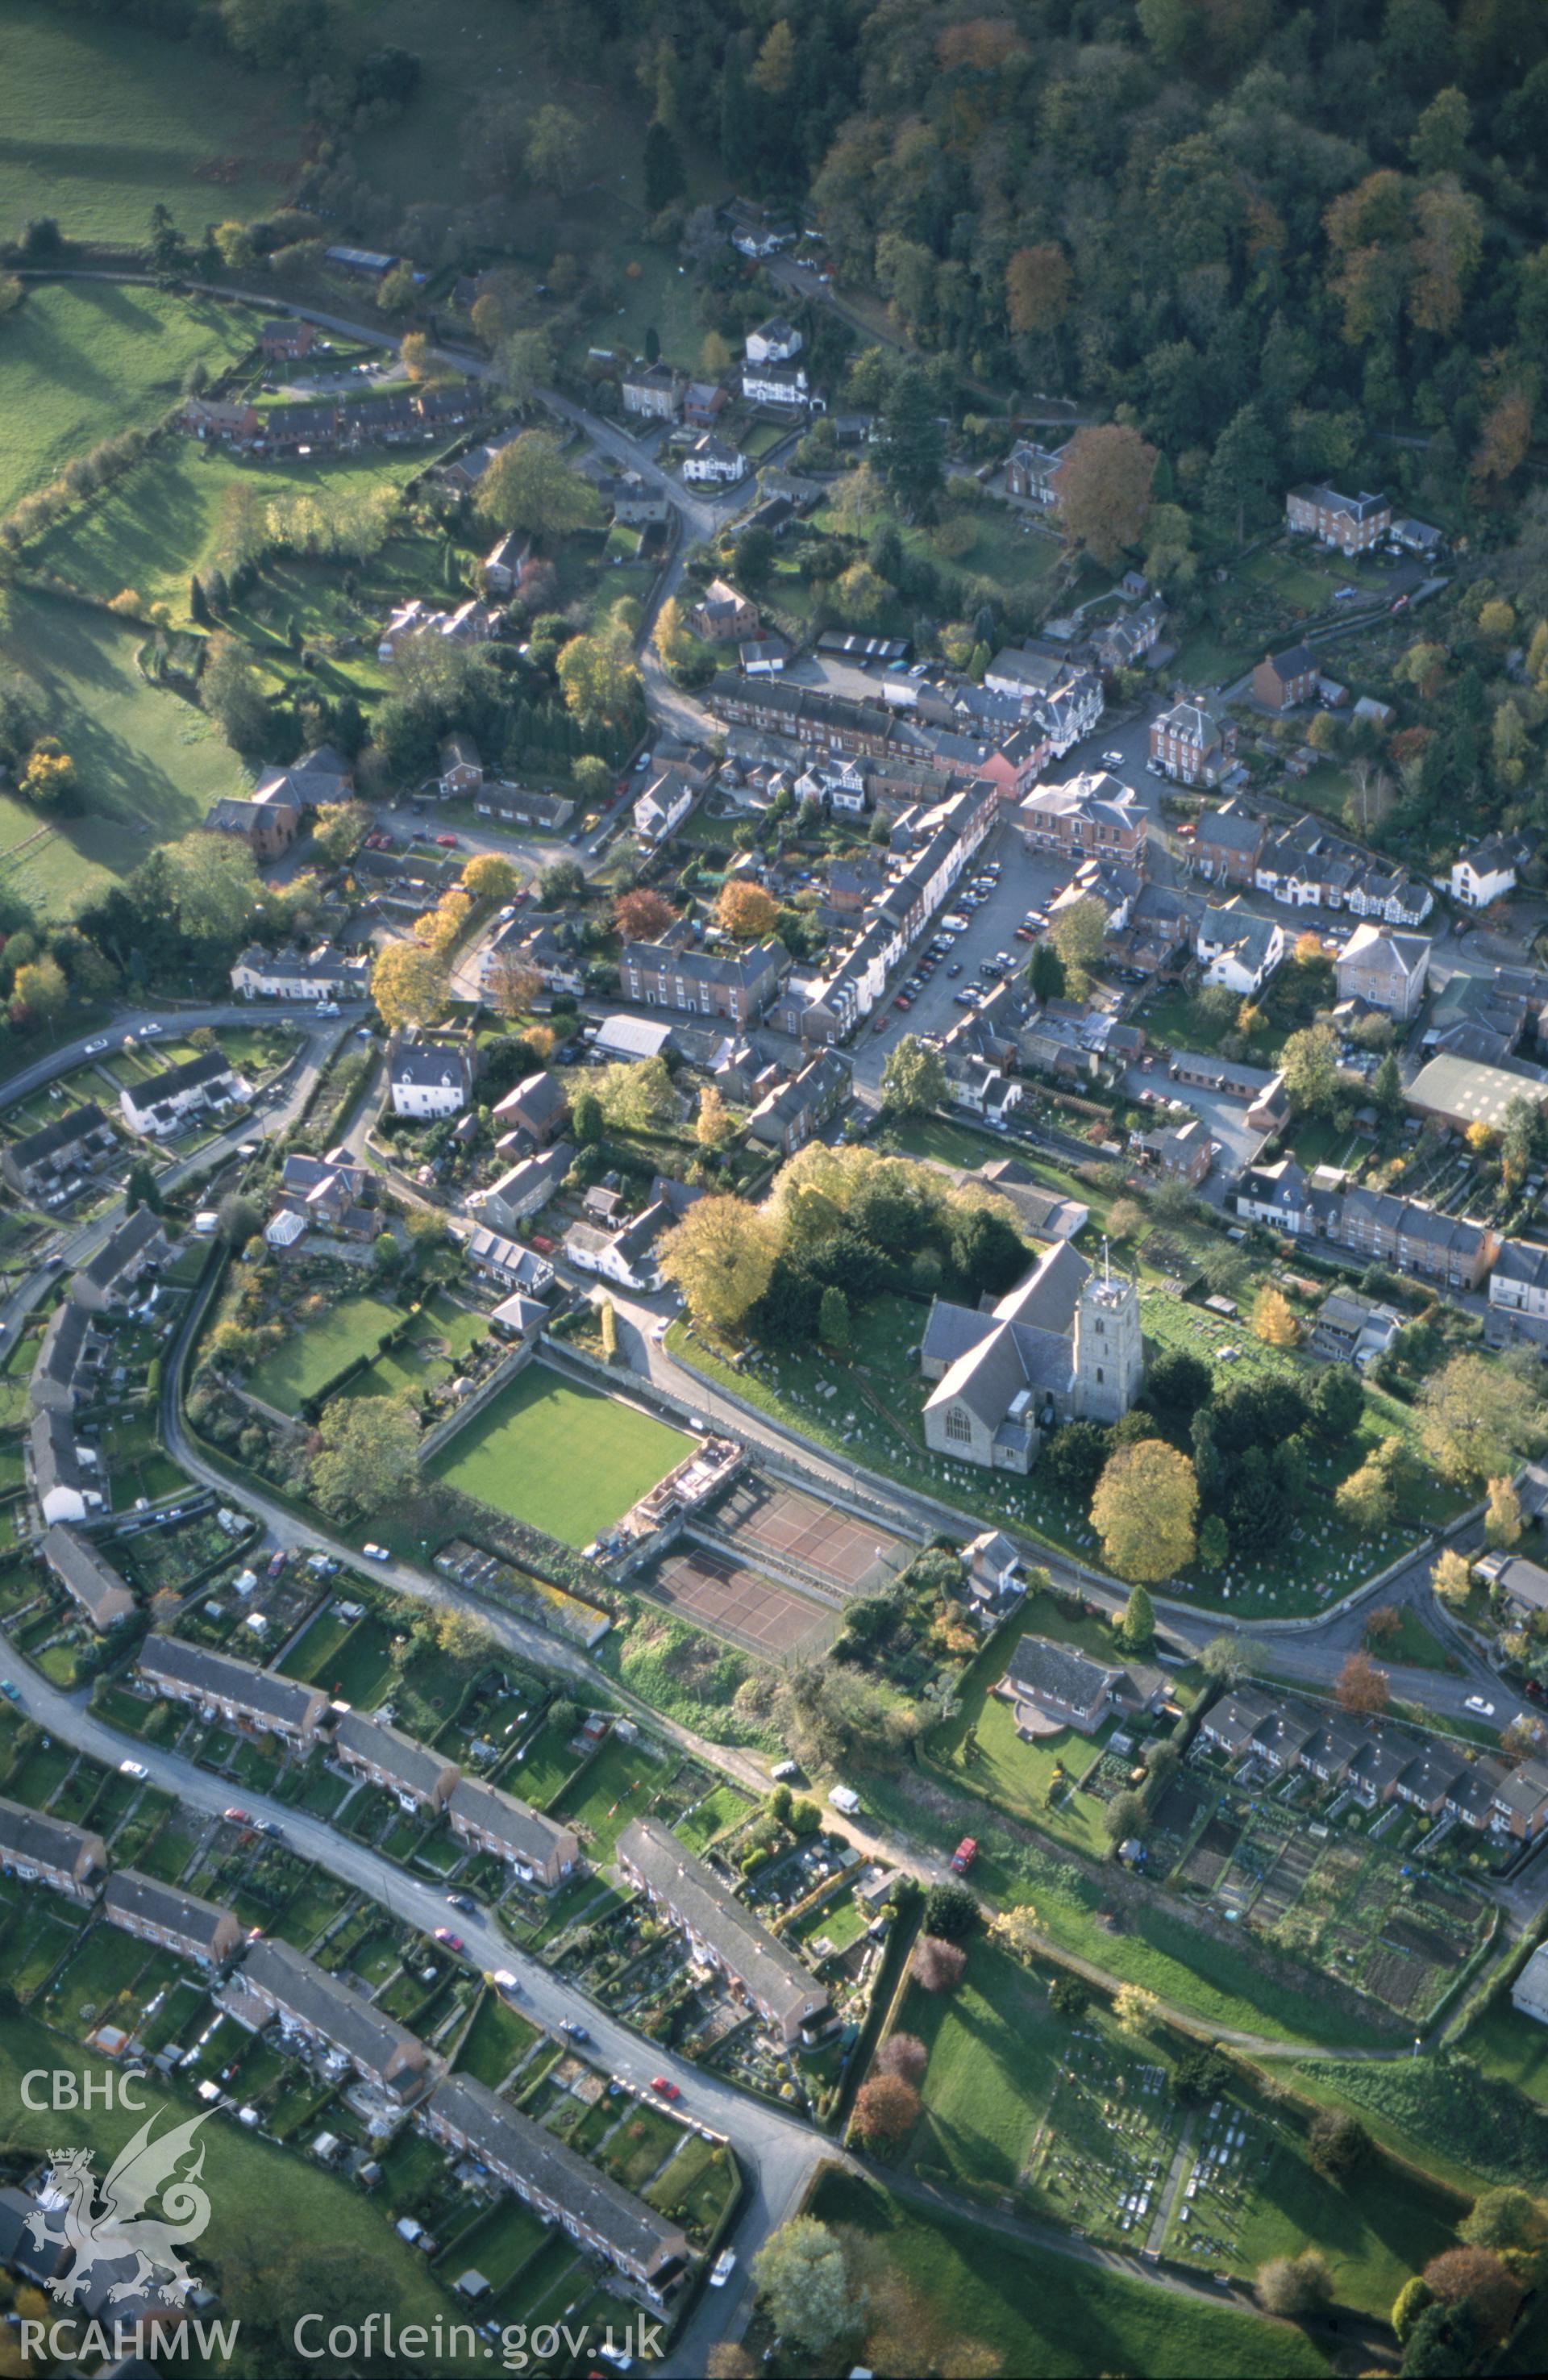 Slide of RCAHMW colour oblique aerial photograph of Montgomery, taken by T.G. Driver, 13/11/2001.